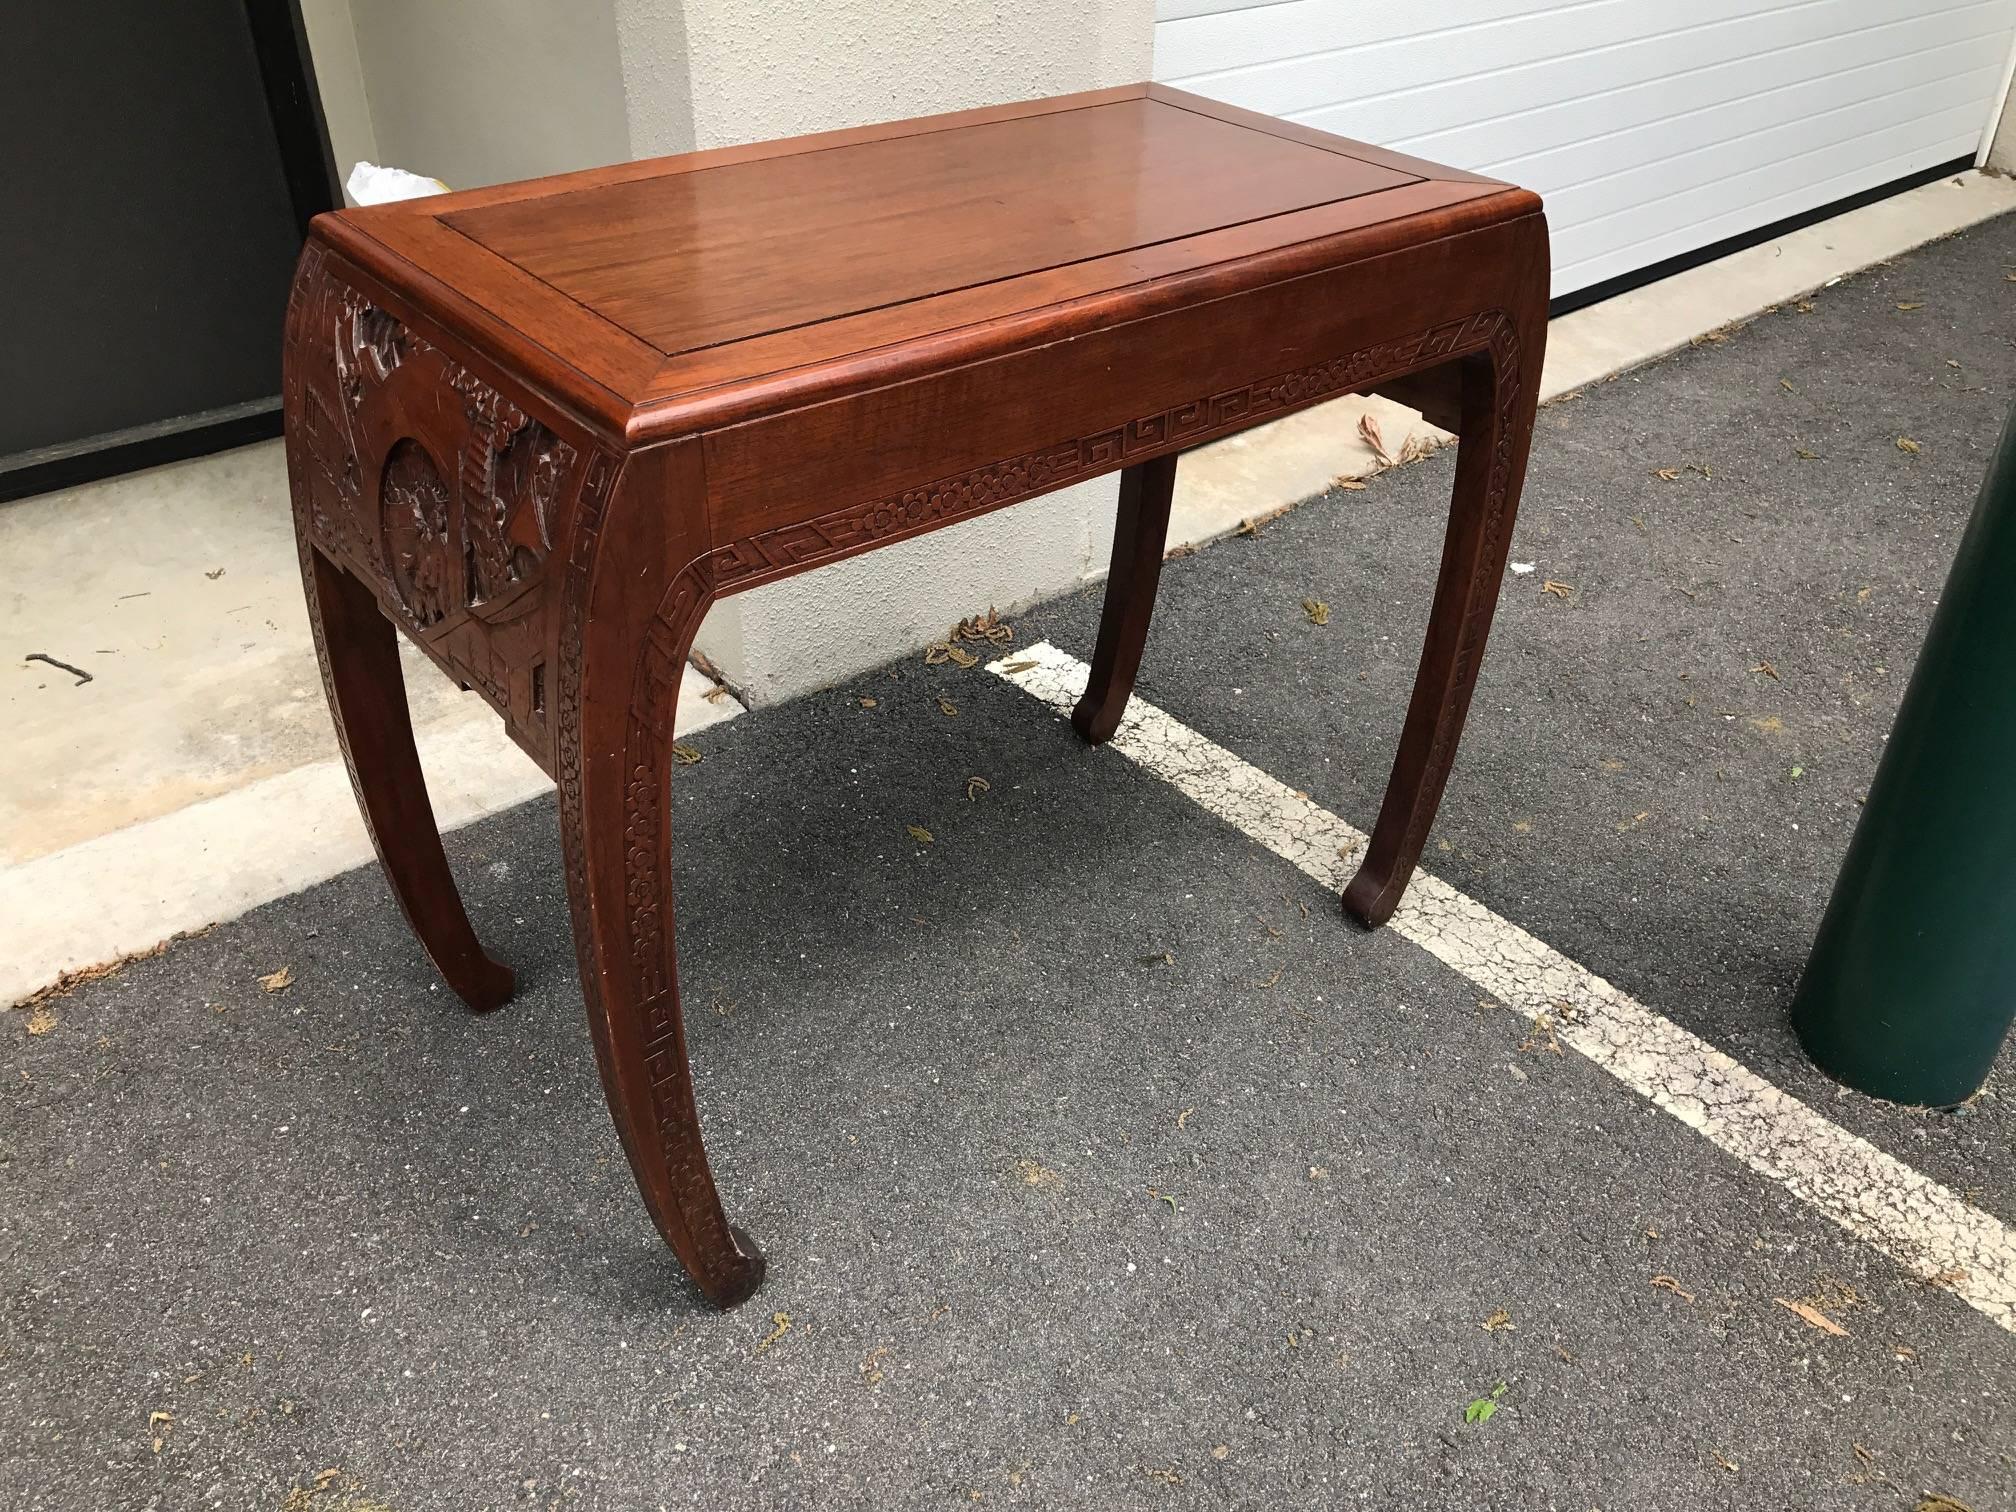 Elegant hand-carved Chinese console altar table. The Classic Asian form with bowed legs accented by hand-carved borders. The side panels are carved in Chinese village scenery. This table is a great size for smaller space measuring 36 inches at its